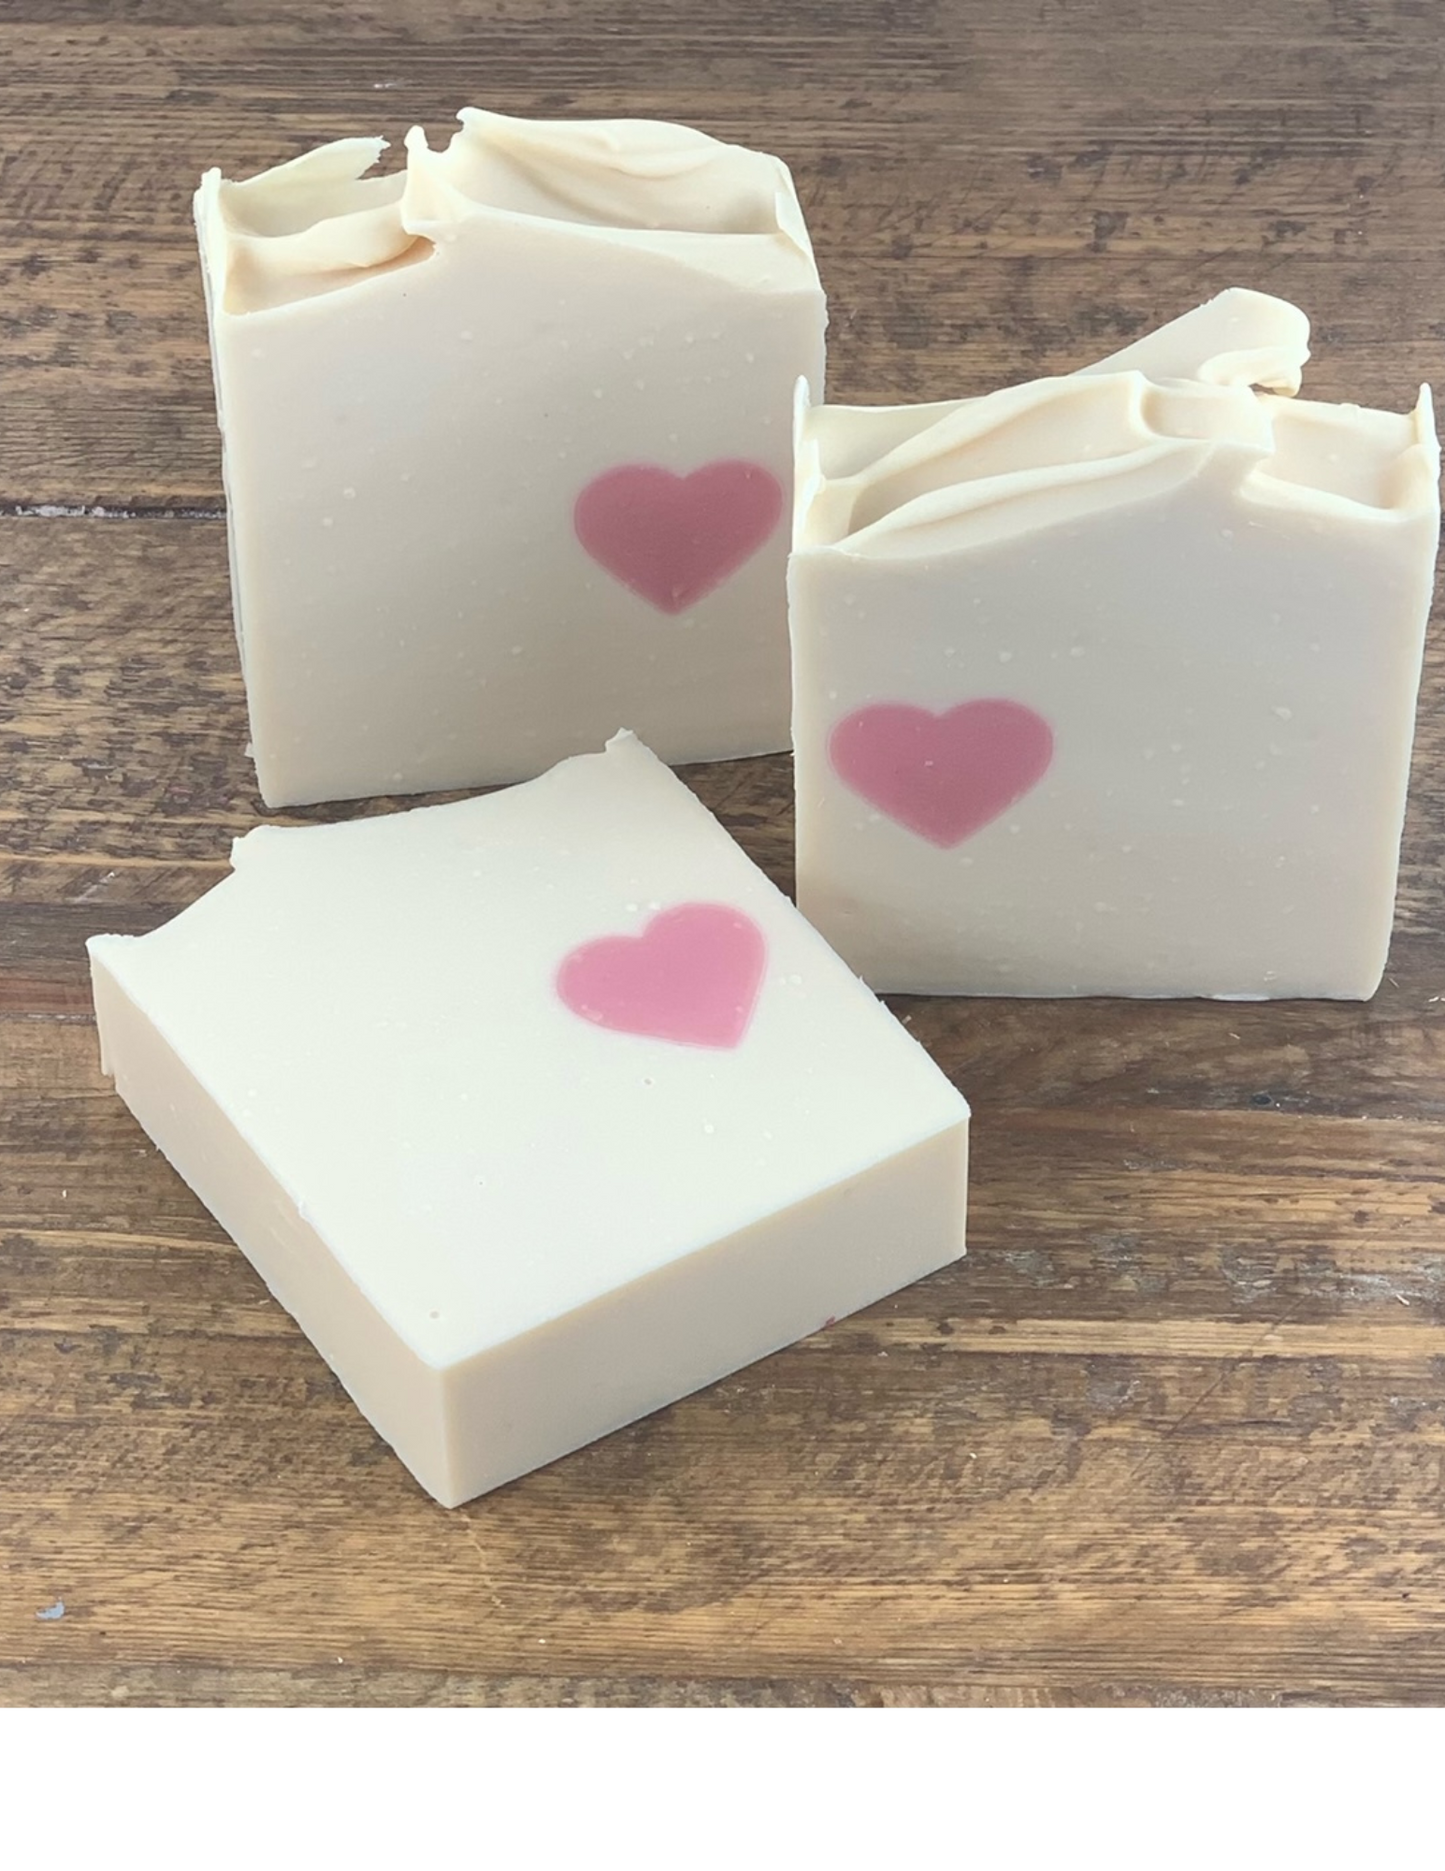 Soap of the Month Subscription Box